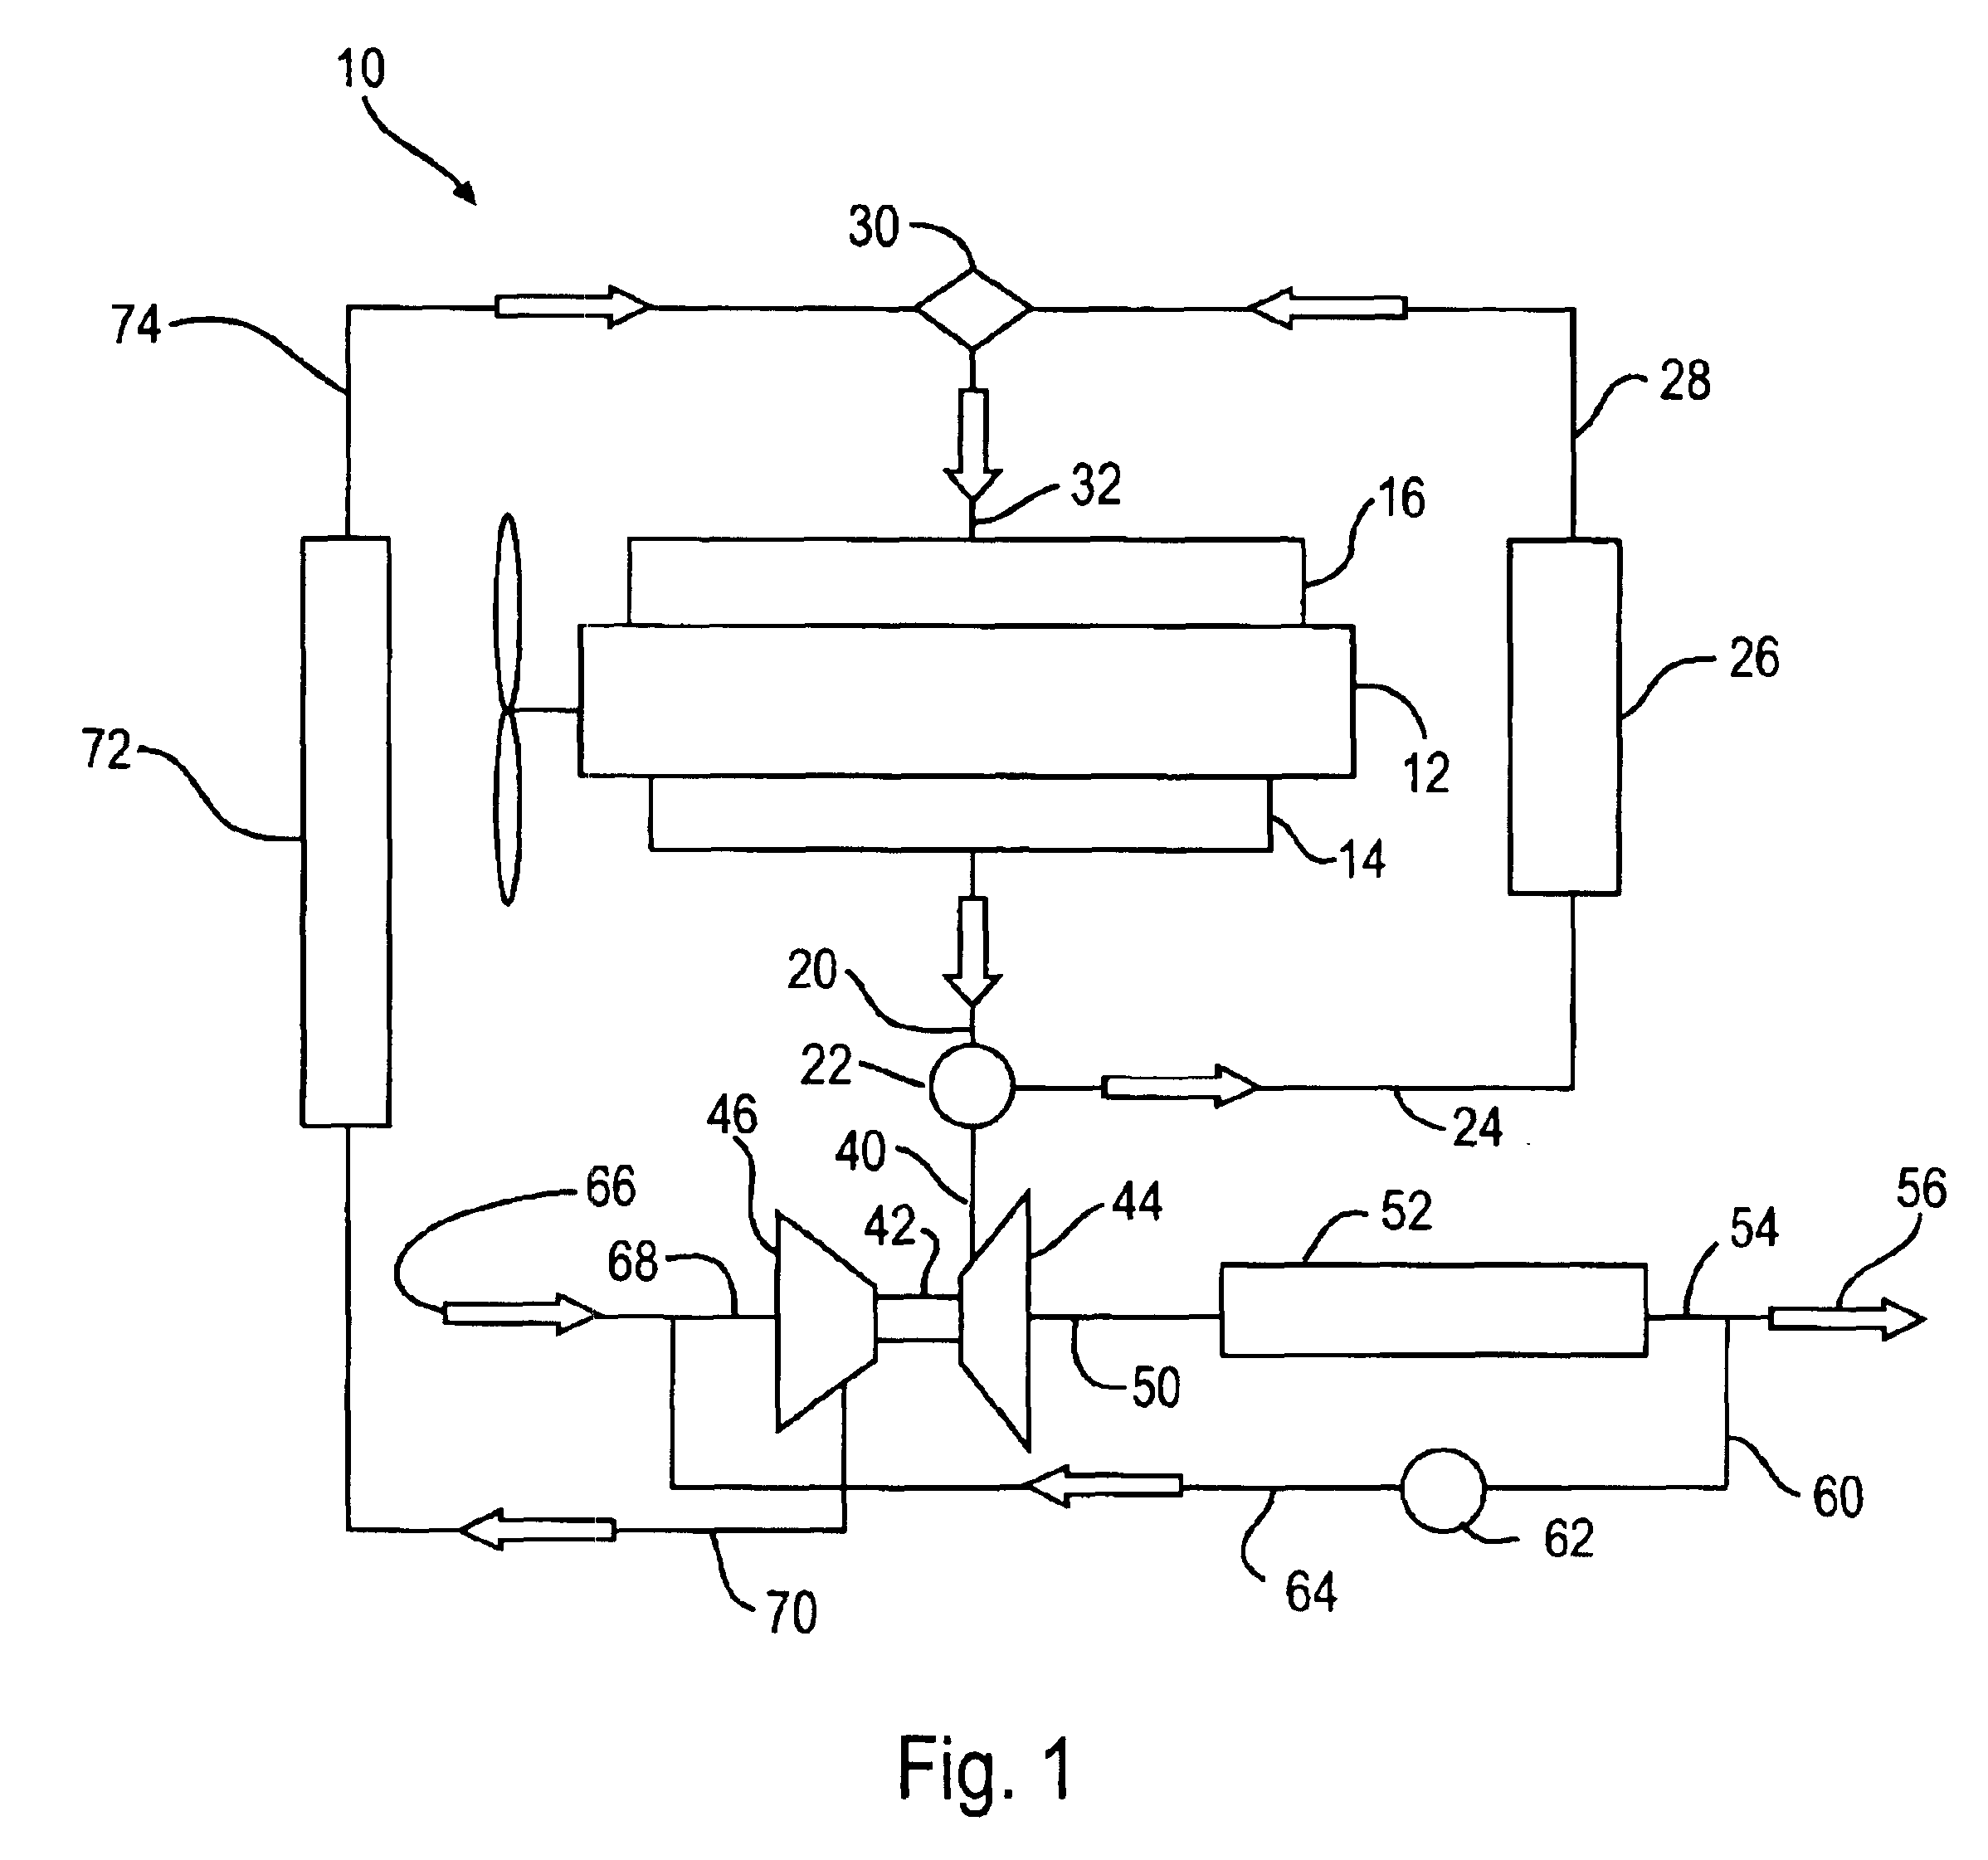 Dual path EGR system and methods